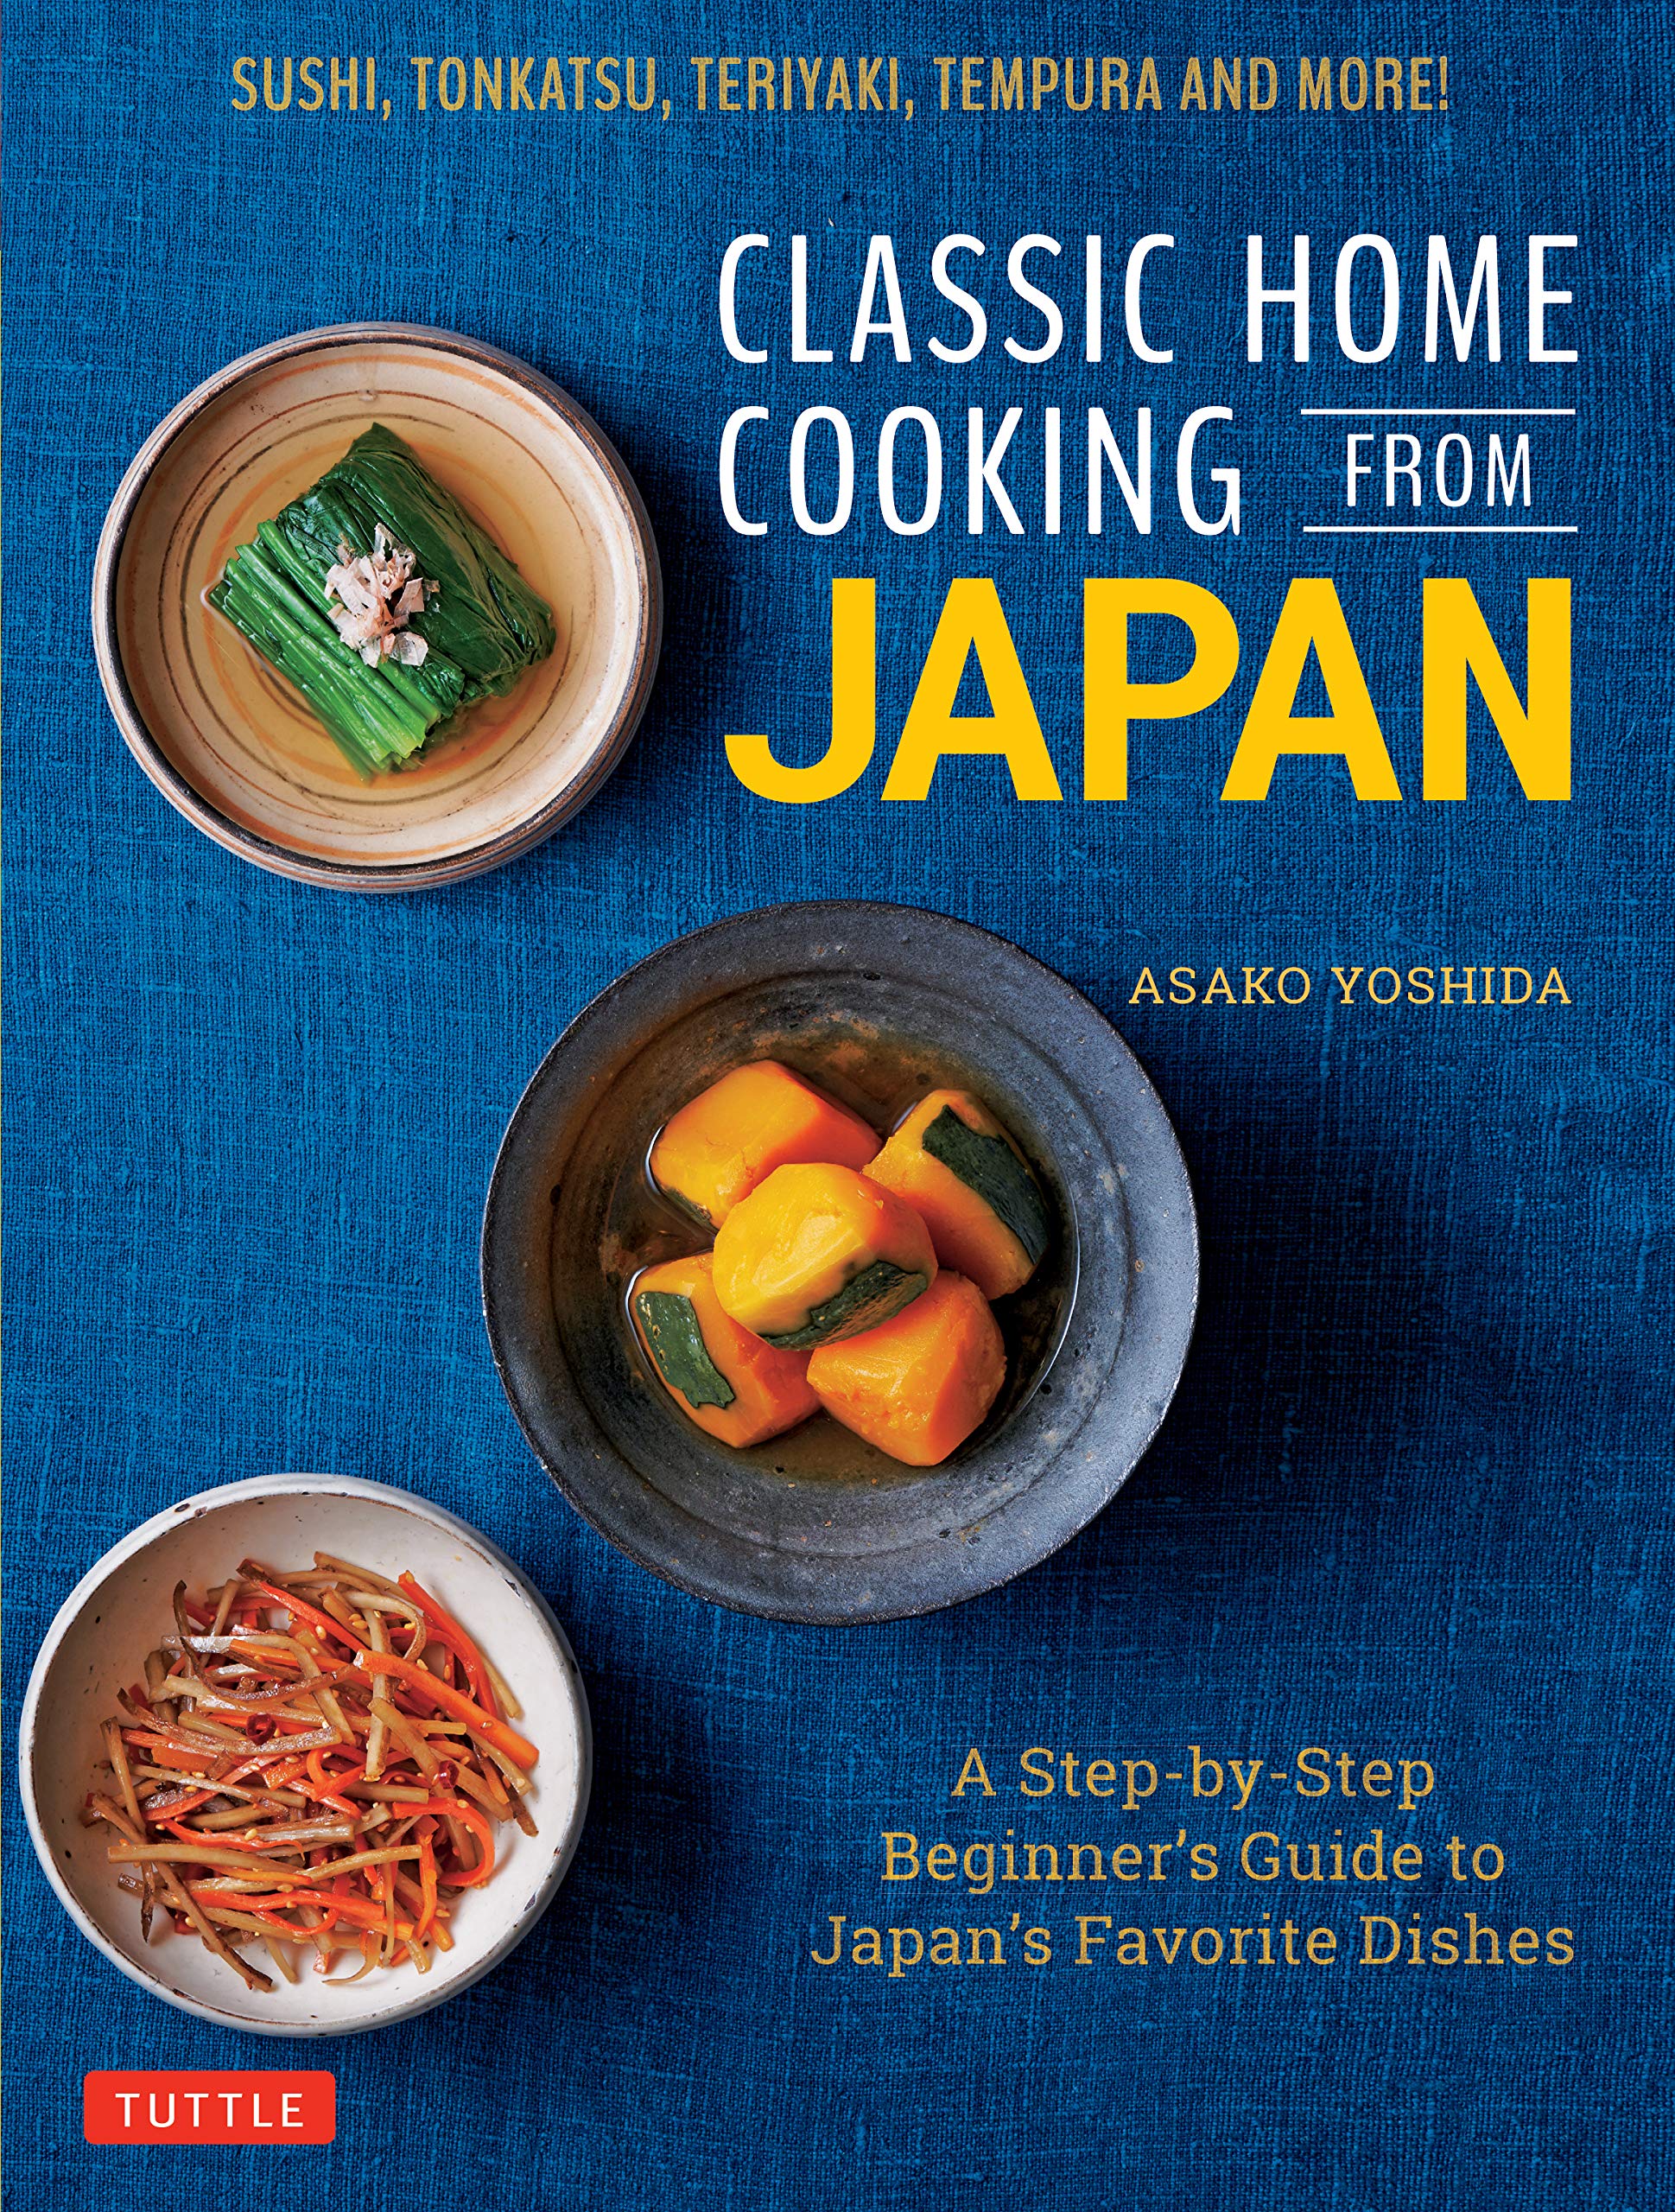 Classic Home Cooking from Japan: A Step-by-Step Beginner's Guide to Japan's Favorite Dishes: Sushi, Tonkatsu, Teriyaki, Tempura and More!